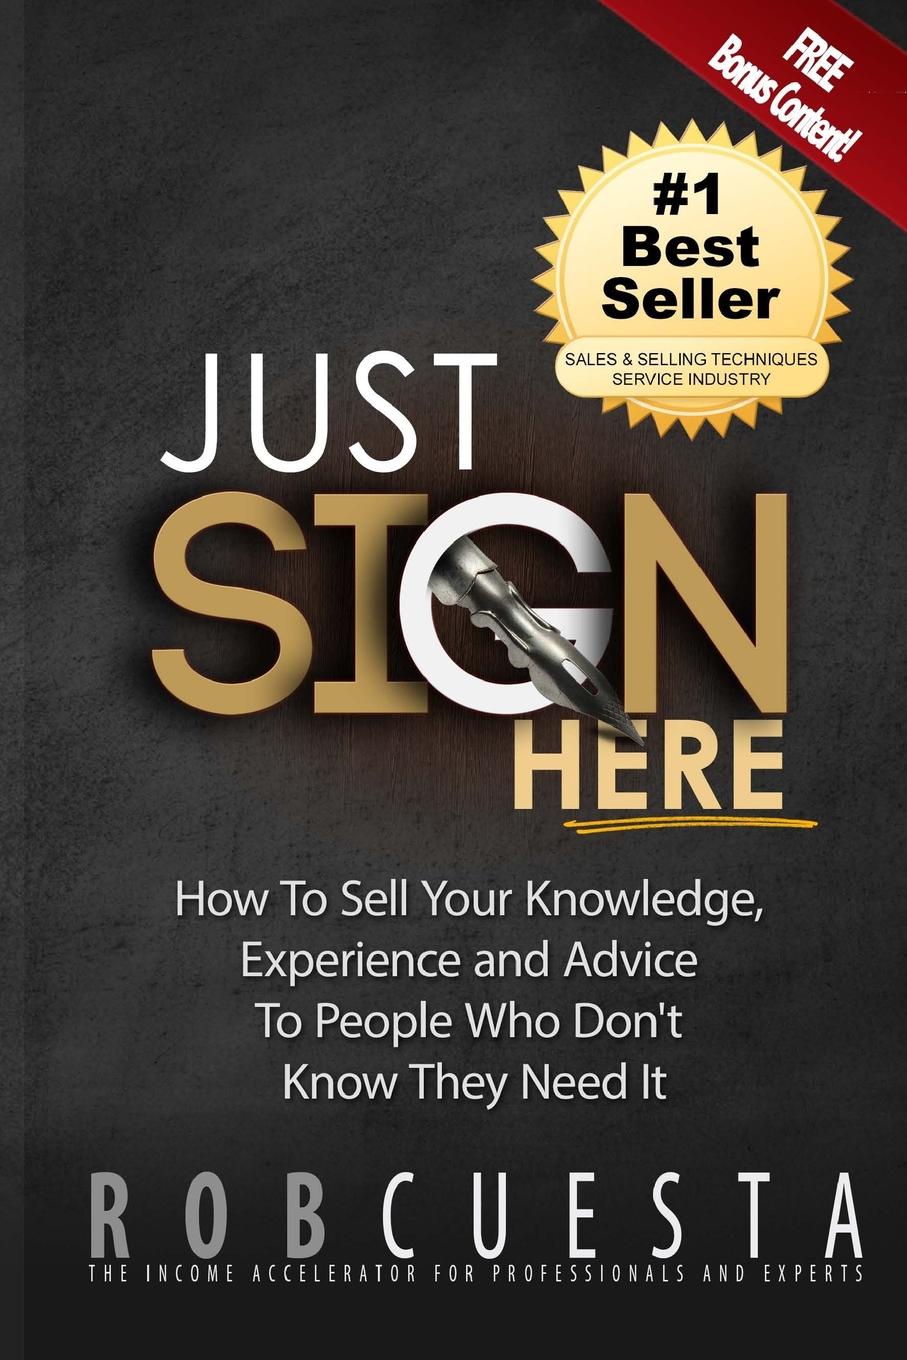 Sold Pro. Knowledge experience